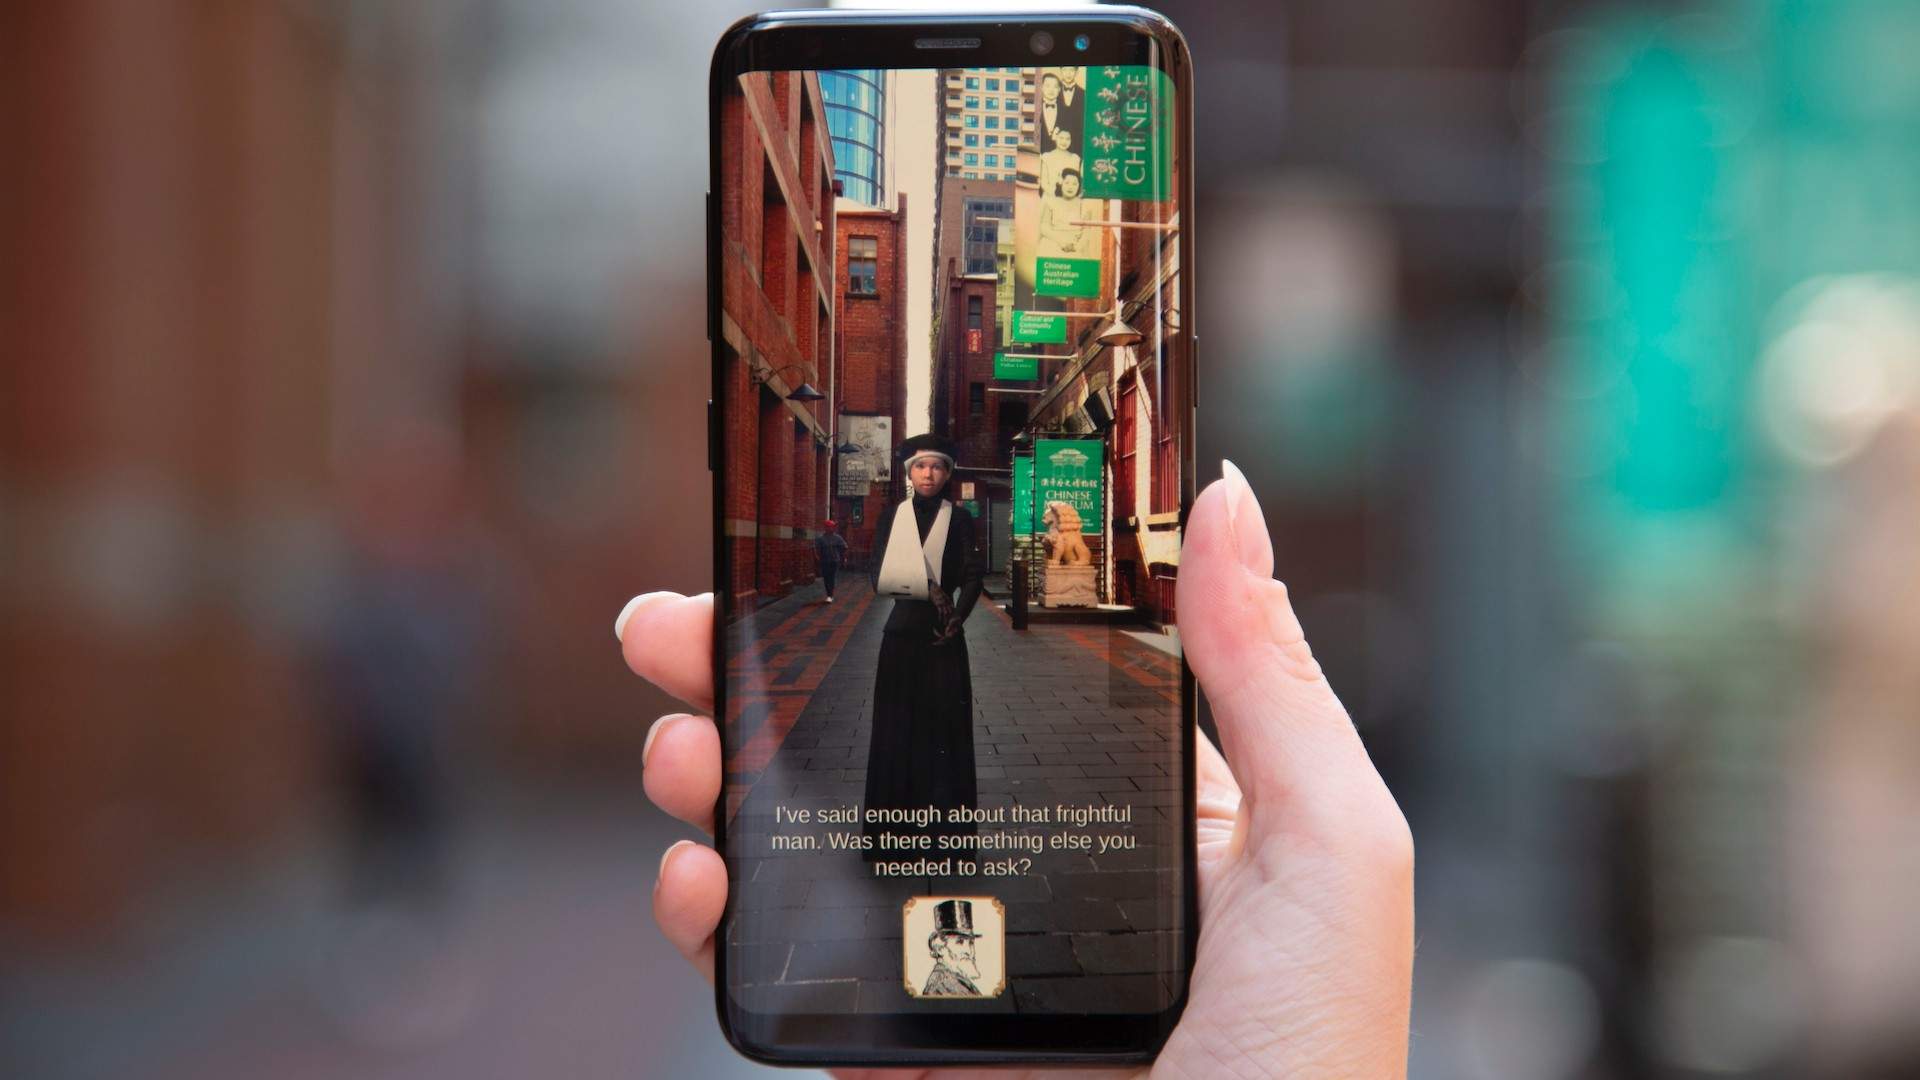 Eastern Market Murder is Melbourne's New Augmented Reality Smartphone Game Based on a True Crime